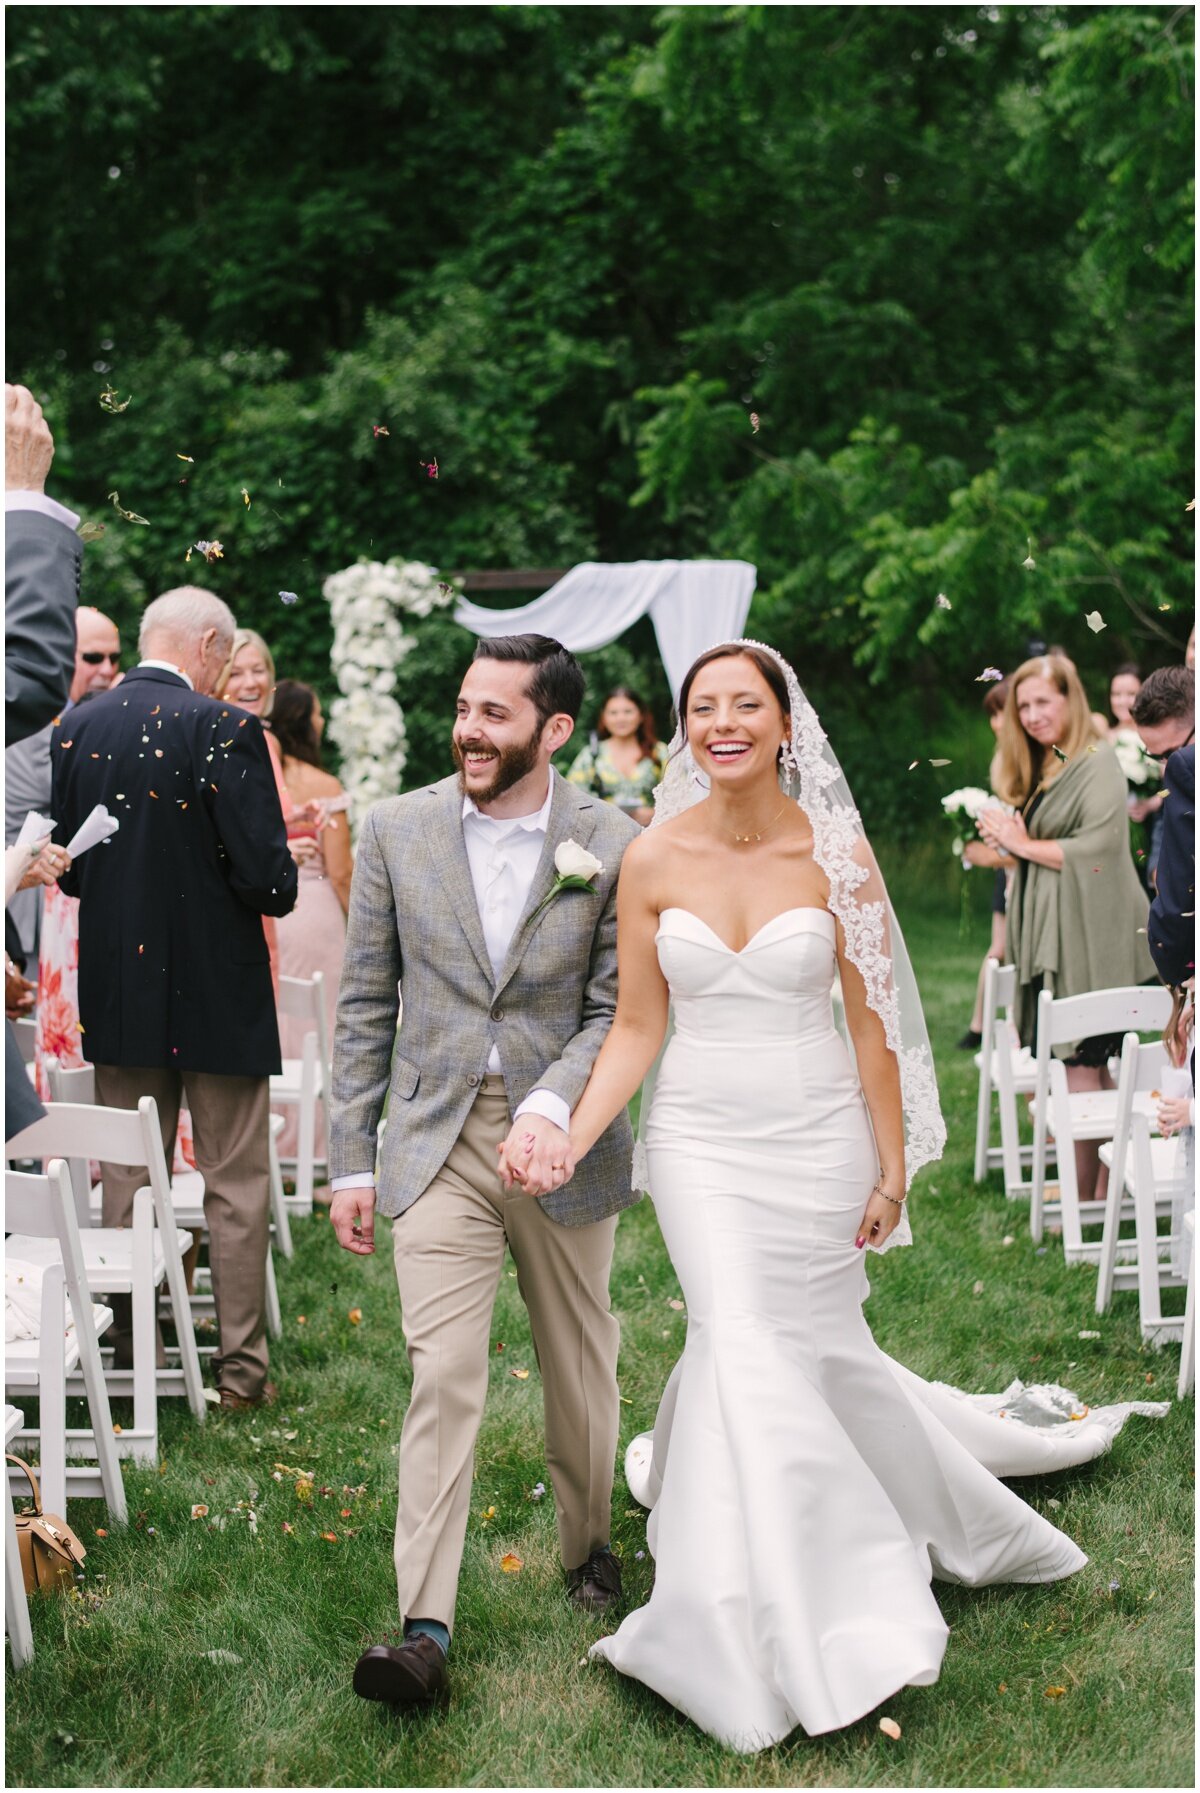  Newlyweds walking down aisle during private estate wedding 